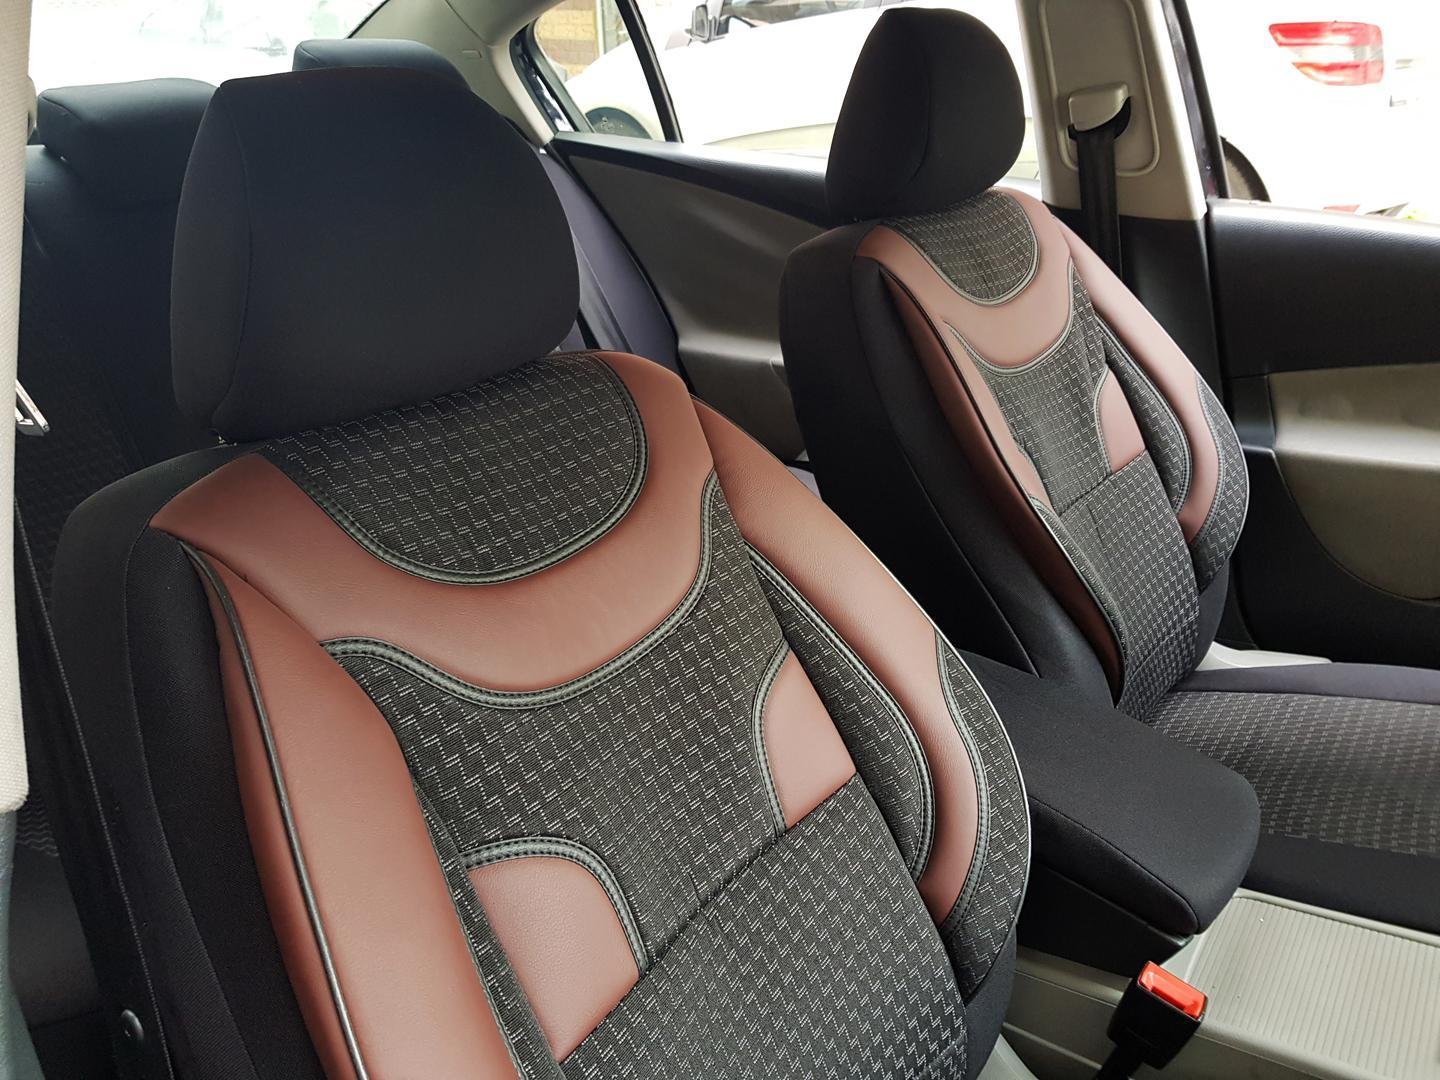 2 BLACK HIGH QUALITY FRONT CAR SEAT COVERS PROTECTORS FOR NISSAN JUKE